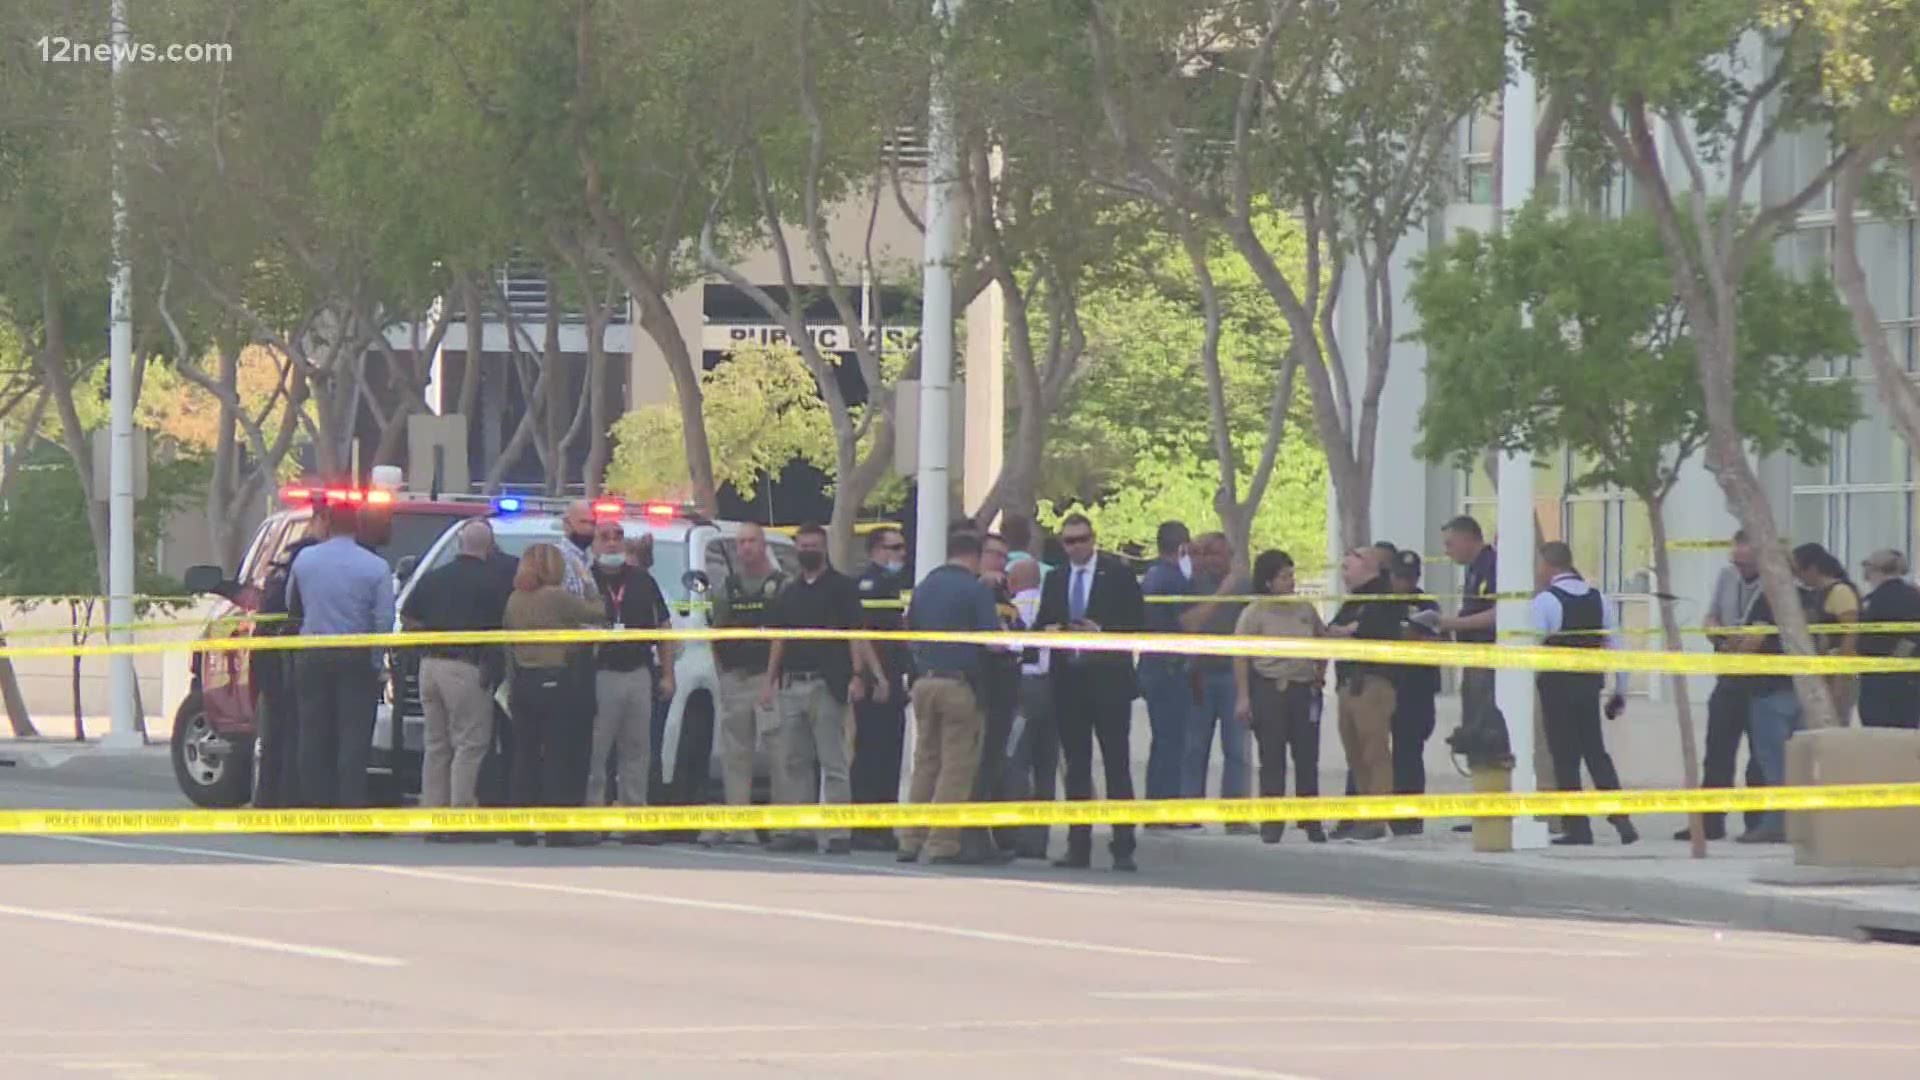 A man is in custody and is accused of shooting a federal security officer at the federal courthouse in downtown Phoenix. The injured officer is expected to be okay.